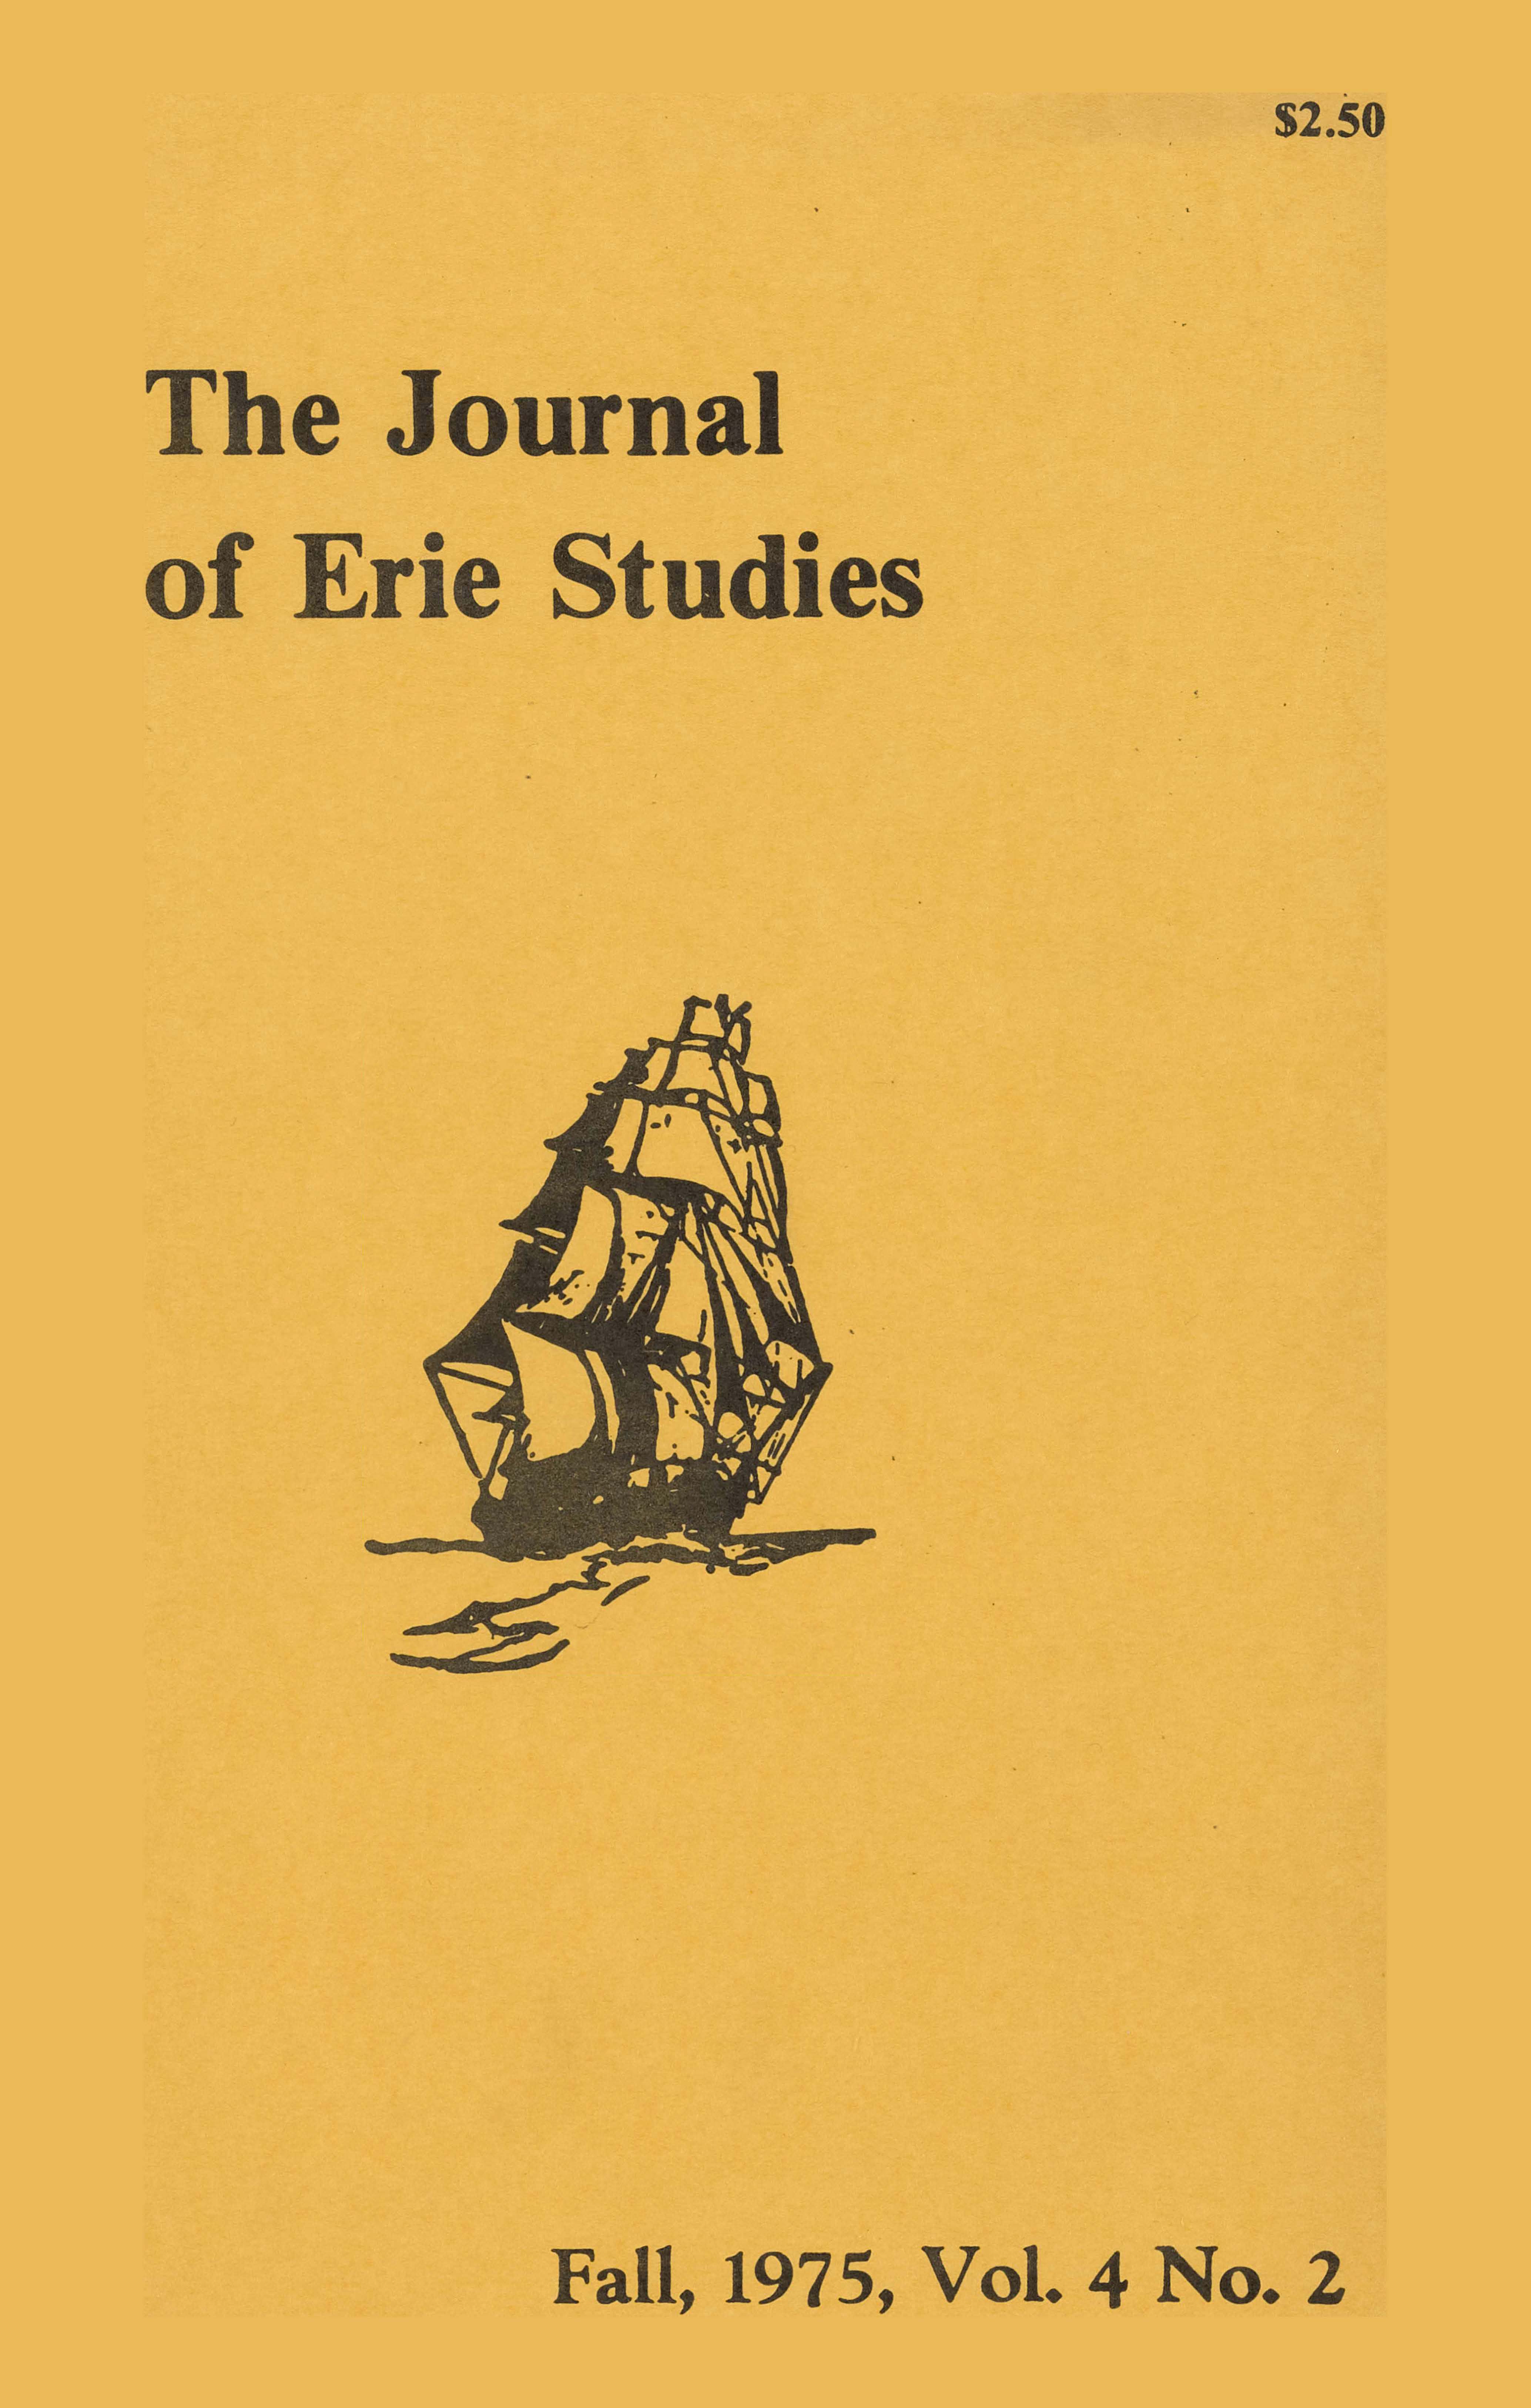 Sketch of a ship with the text, "The Journal of Erie Studies, Fall, 1975, Vol. 4 No. 2."